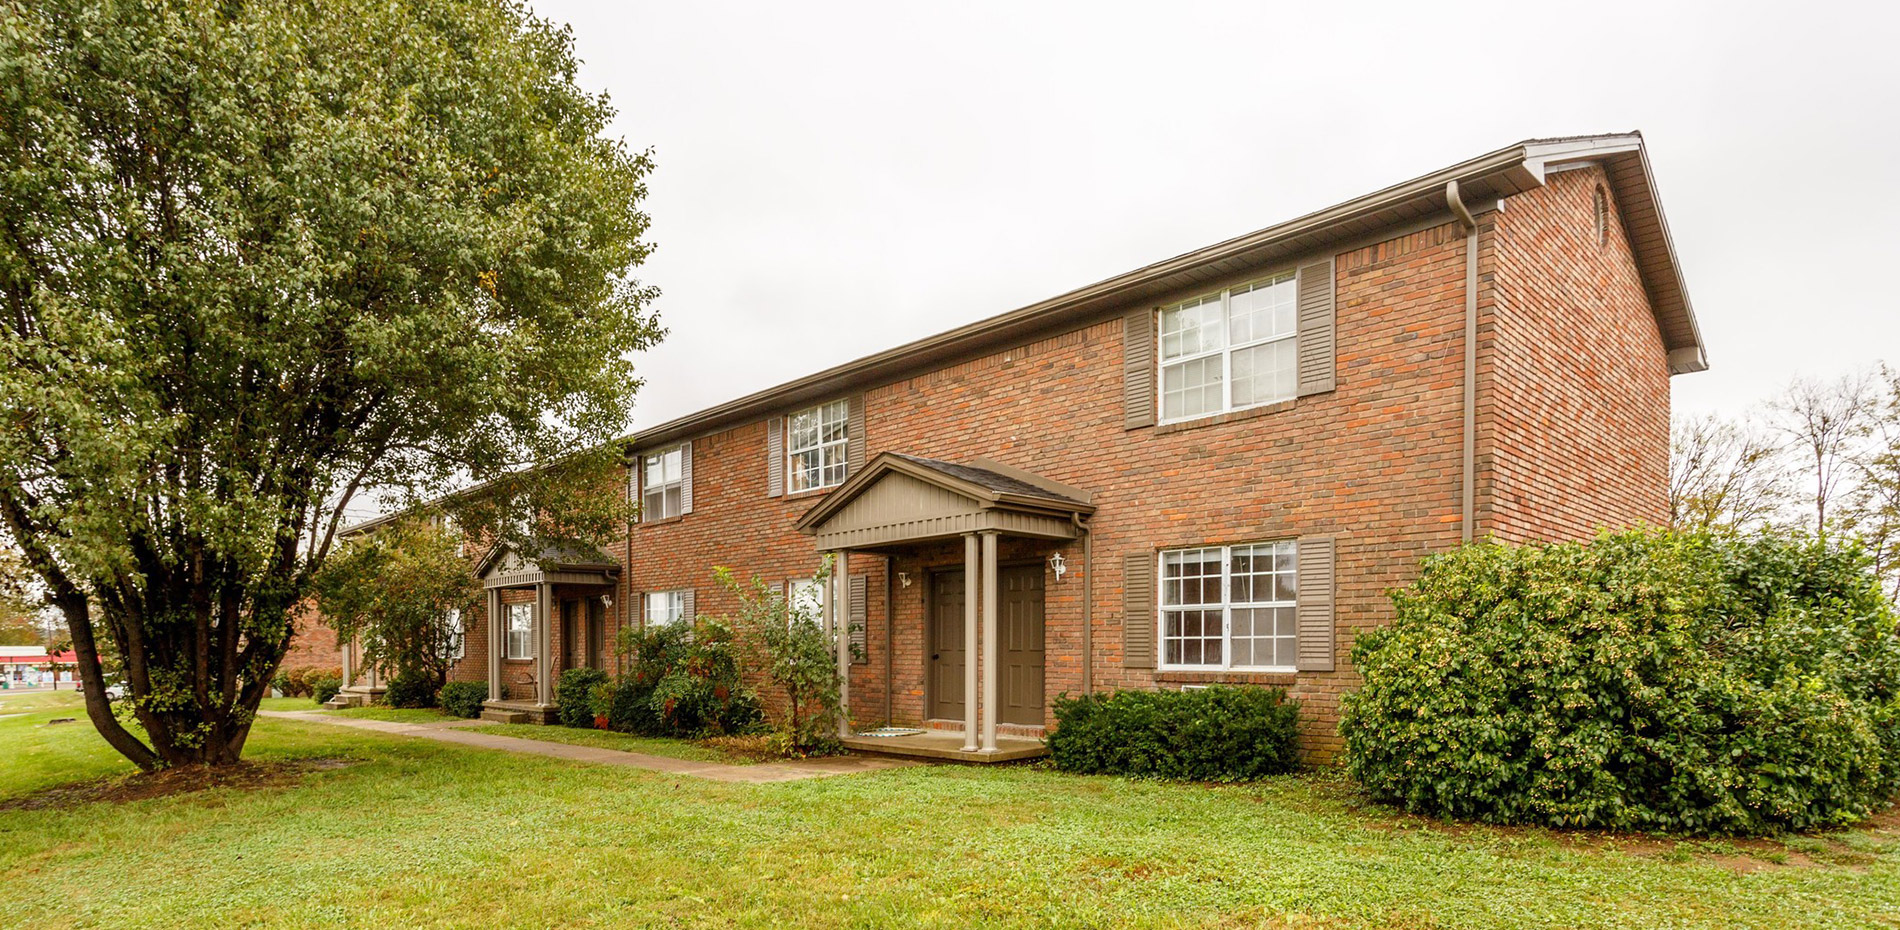 Apartments in Hopkinsville, KY